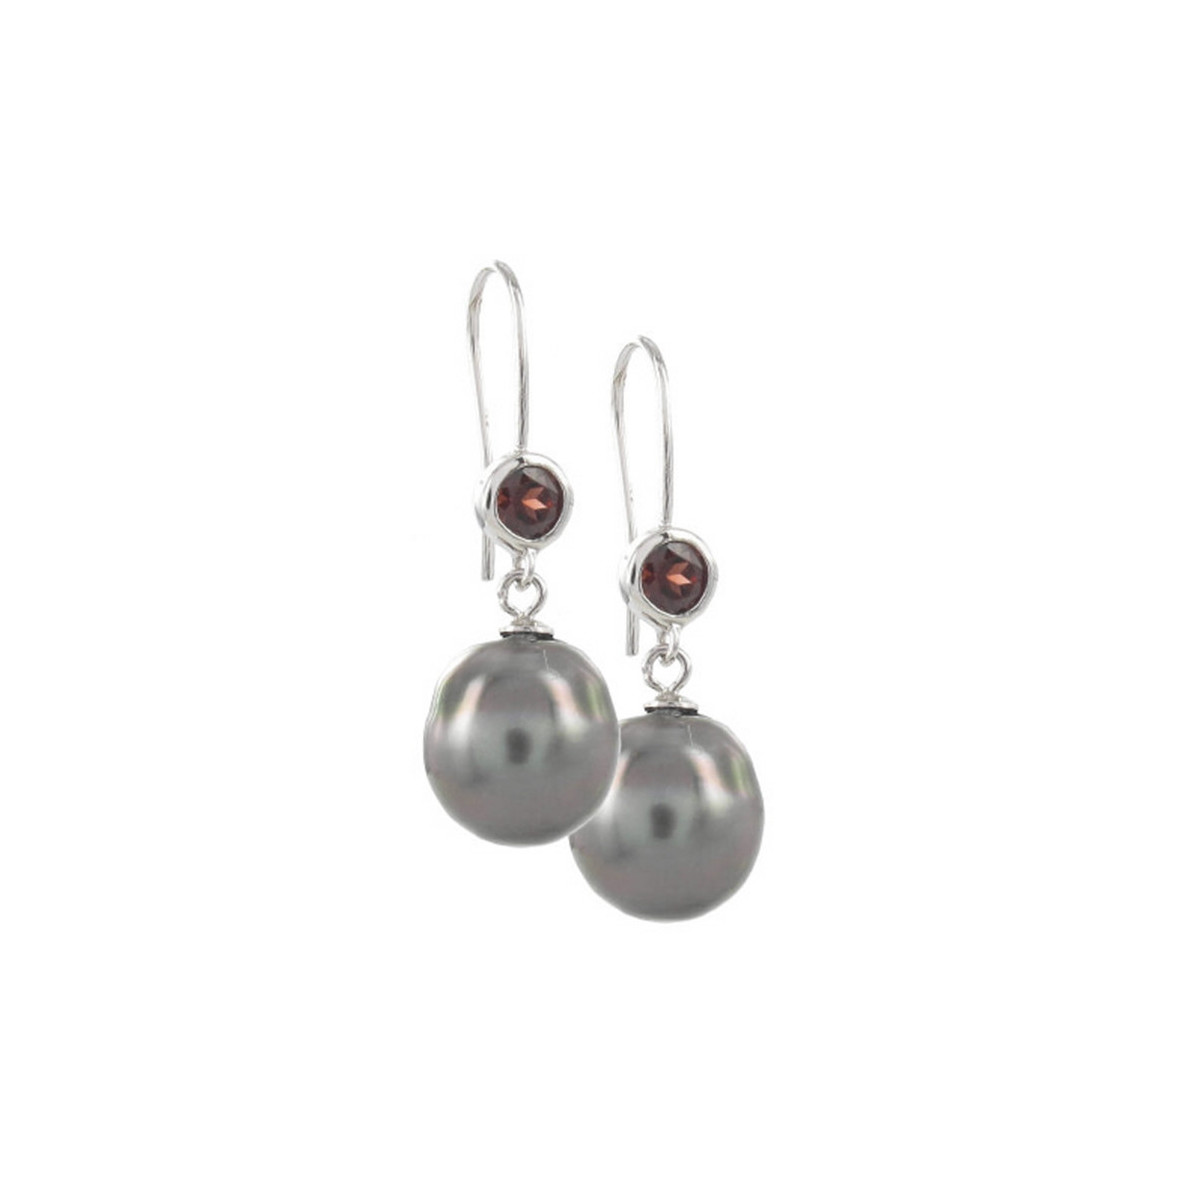 STERLING SILVER GARNET AND PEARL